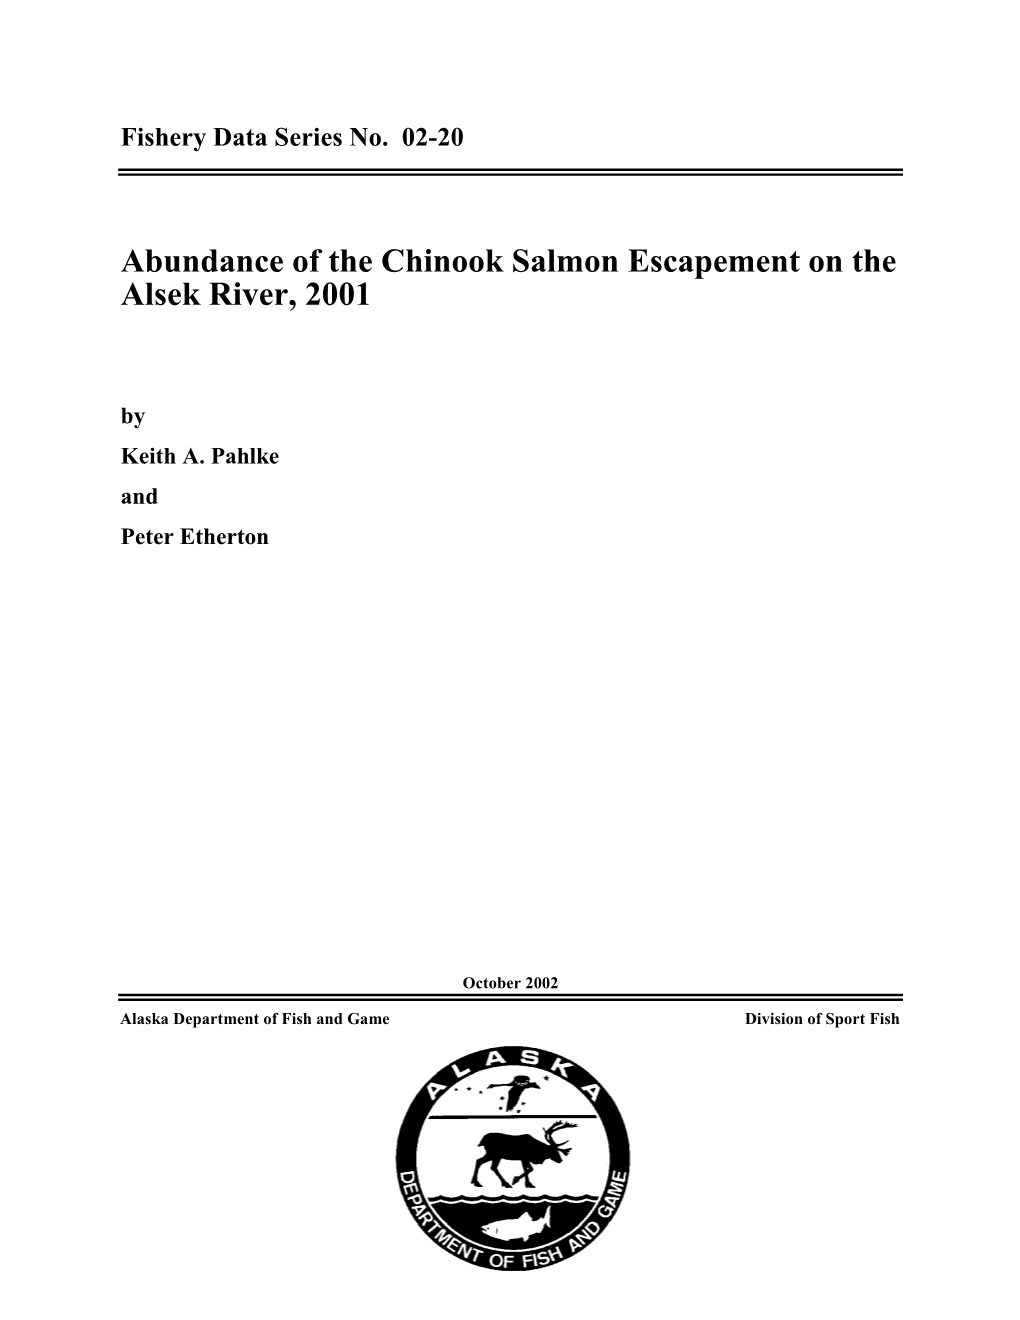 Abundance of the Chinook Salmon Escapement on the Alsek River, 2001